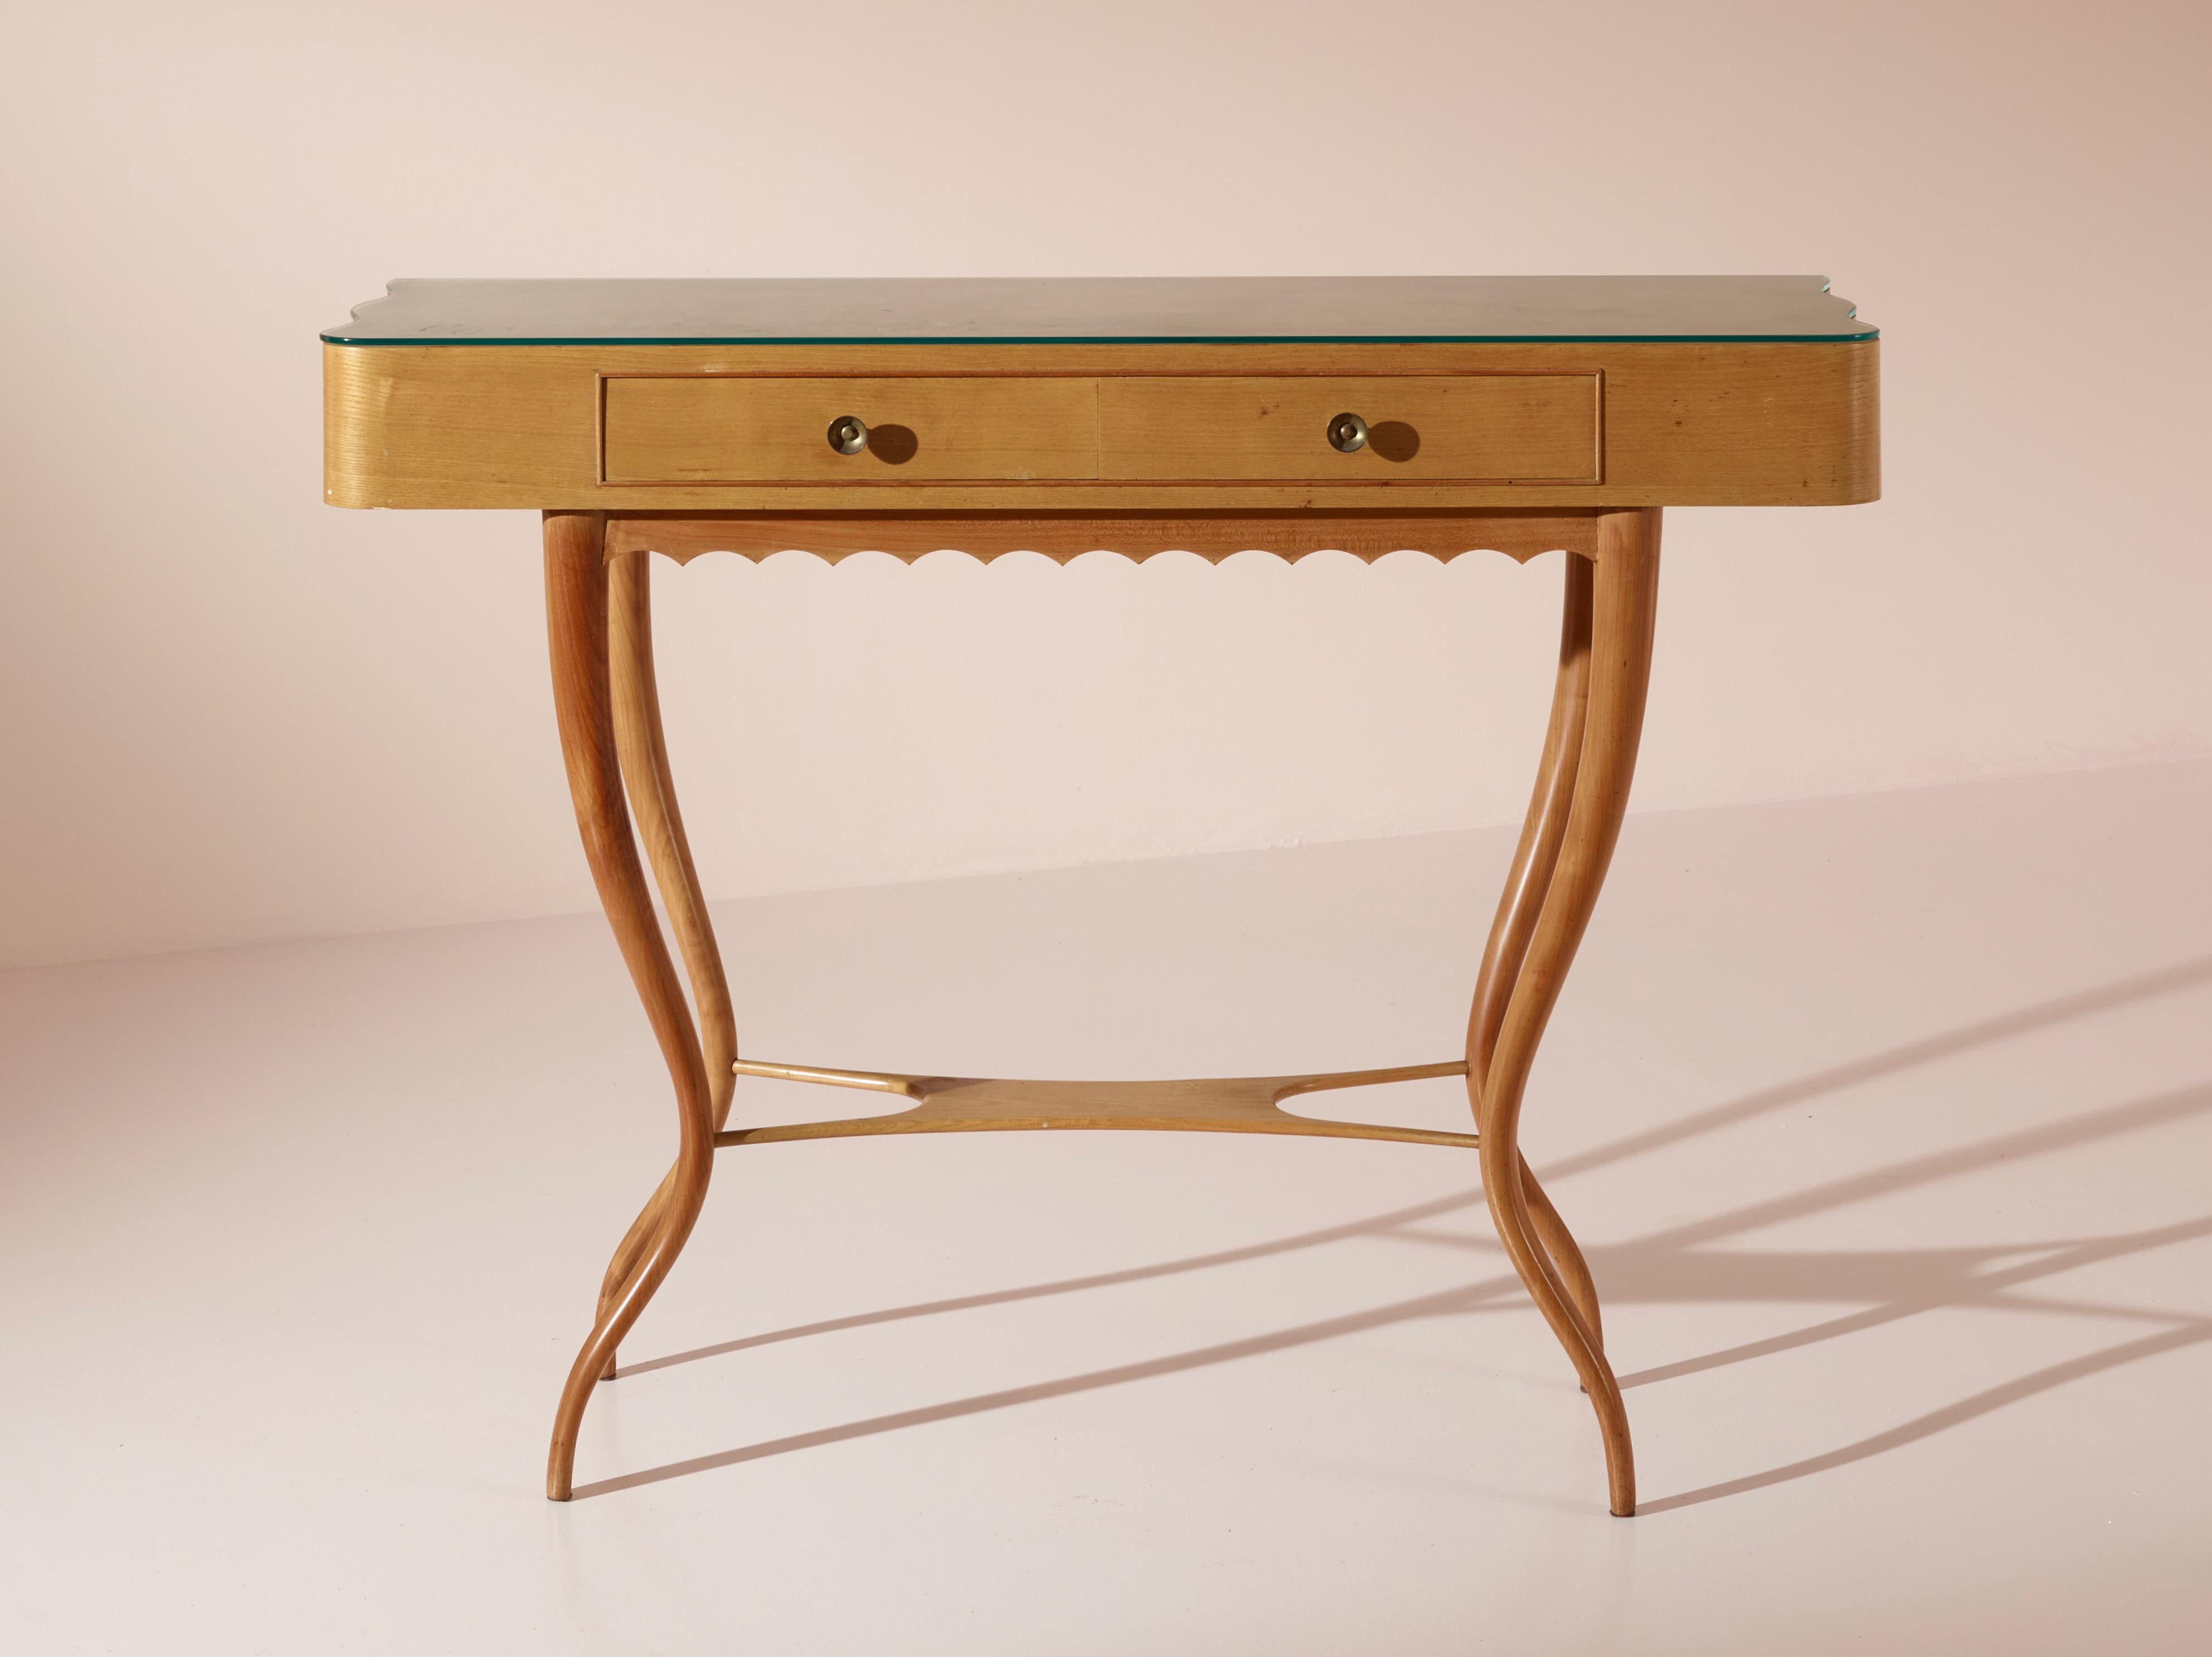 An exquisite console table originating from Chiavari, Italy in the 1950s is a fine example of mid-century craftsmanship. Constructed using durable beechwood, this elegant piece measures 121x40x94cm (WxDxH), exhibiting a clean and lightweight